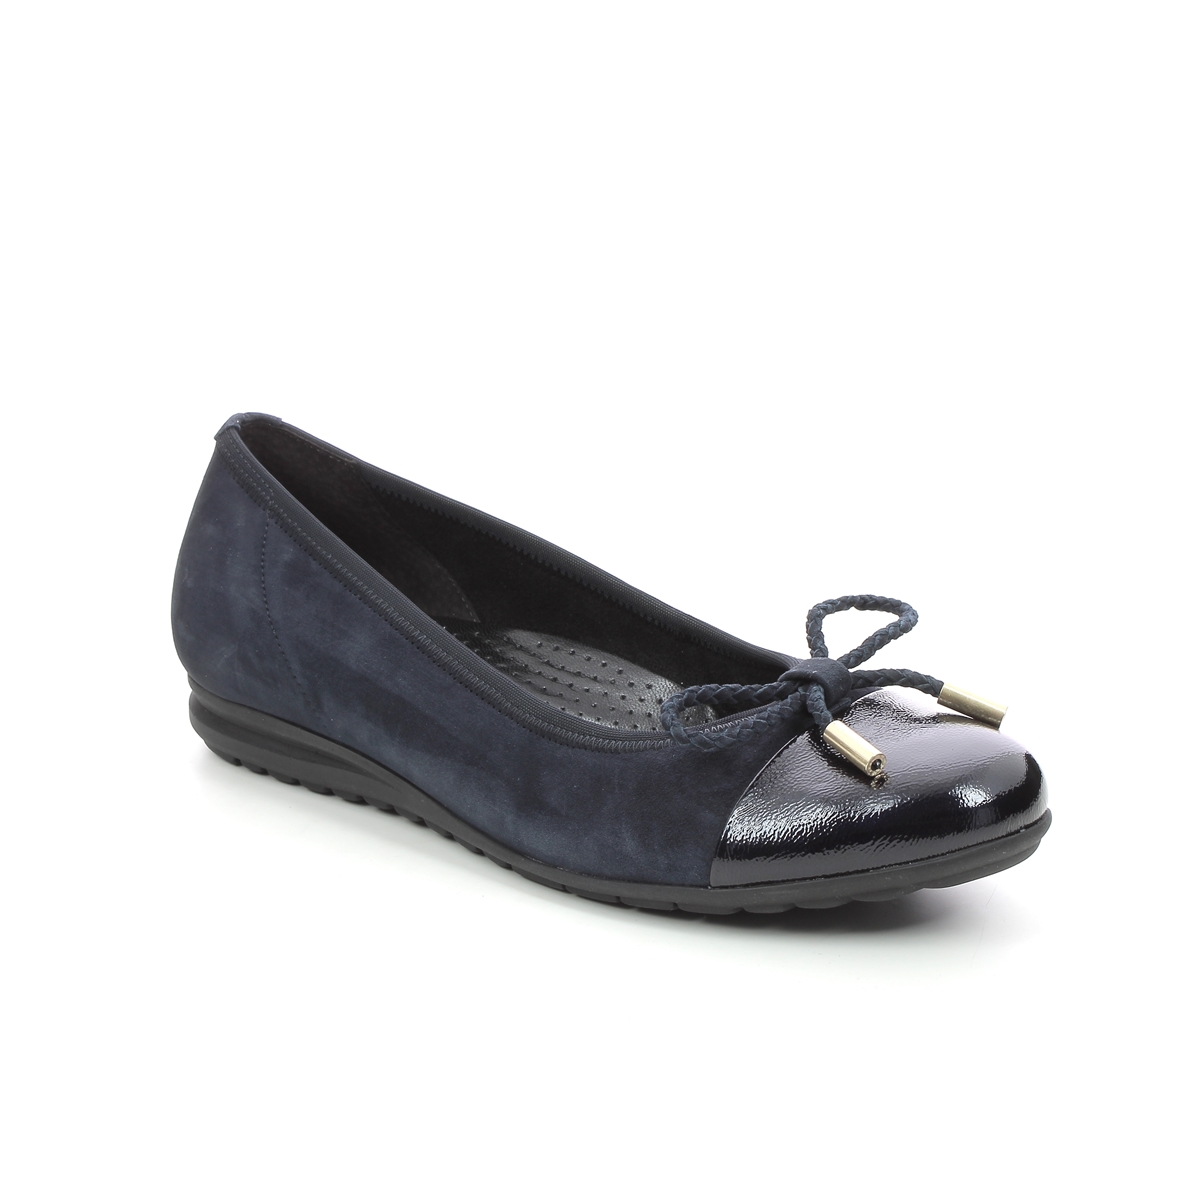 Gabor Snug Navy Patent Suede Womens pumps 72.623.46 in a Plain  in Size 4.5